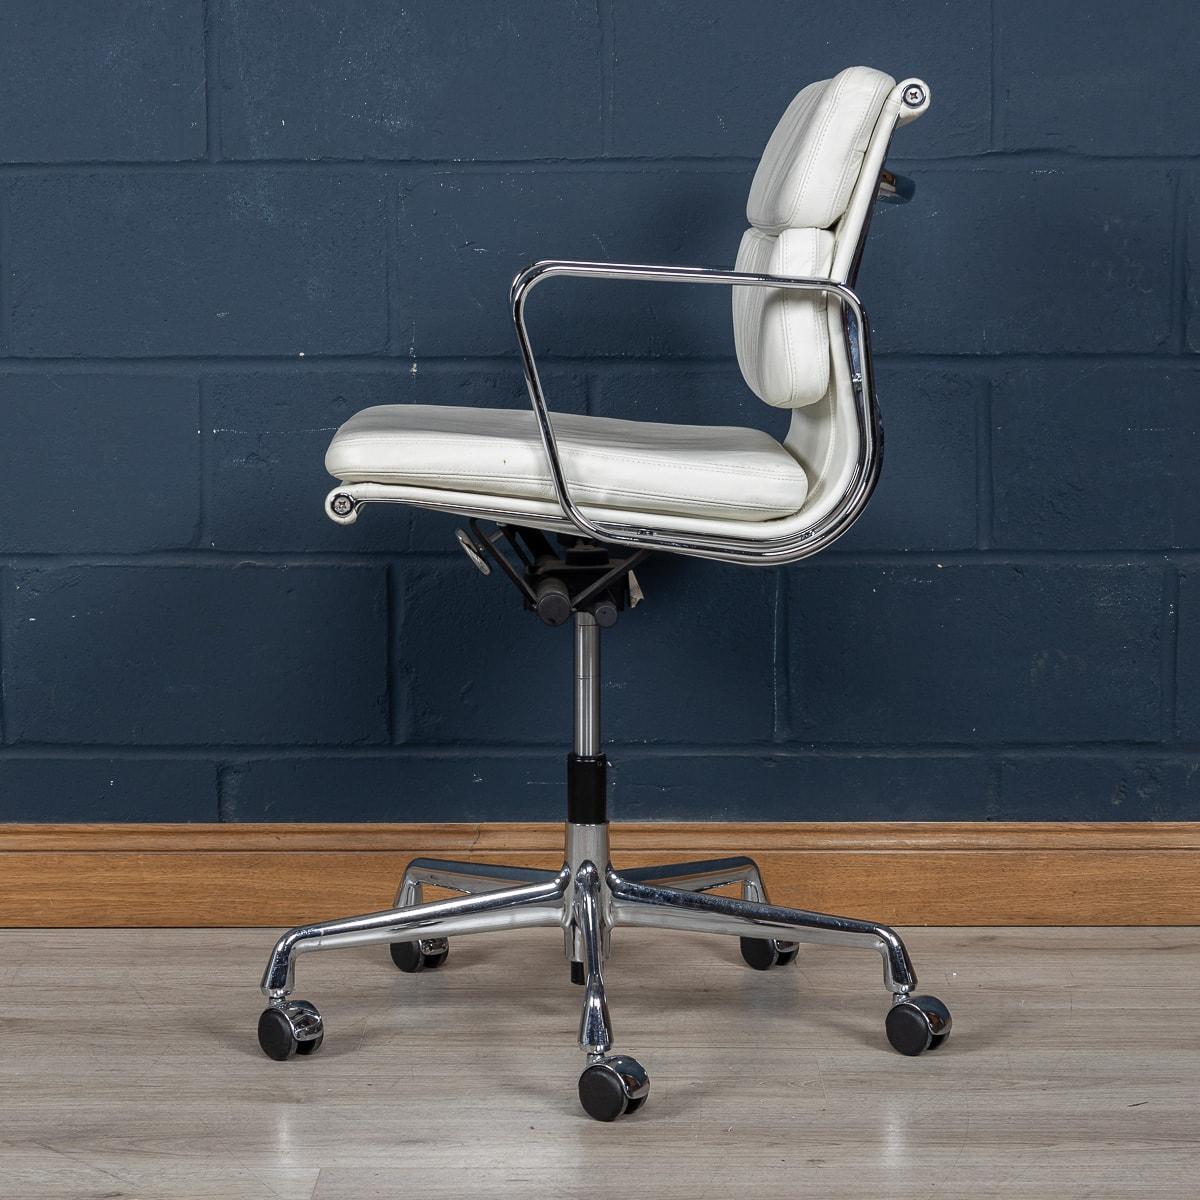 A stunning Eames chair by Vitra, of recent manufacture, in a delightful full white “snow“ leather upholstery. The white contrasts magnificently with the polished metal finish and stands on castors. Height adjustable and reclinable, the chair offers